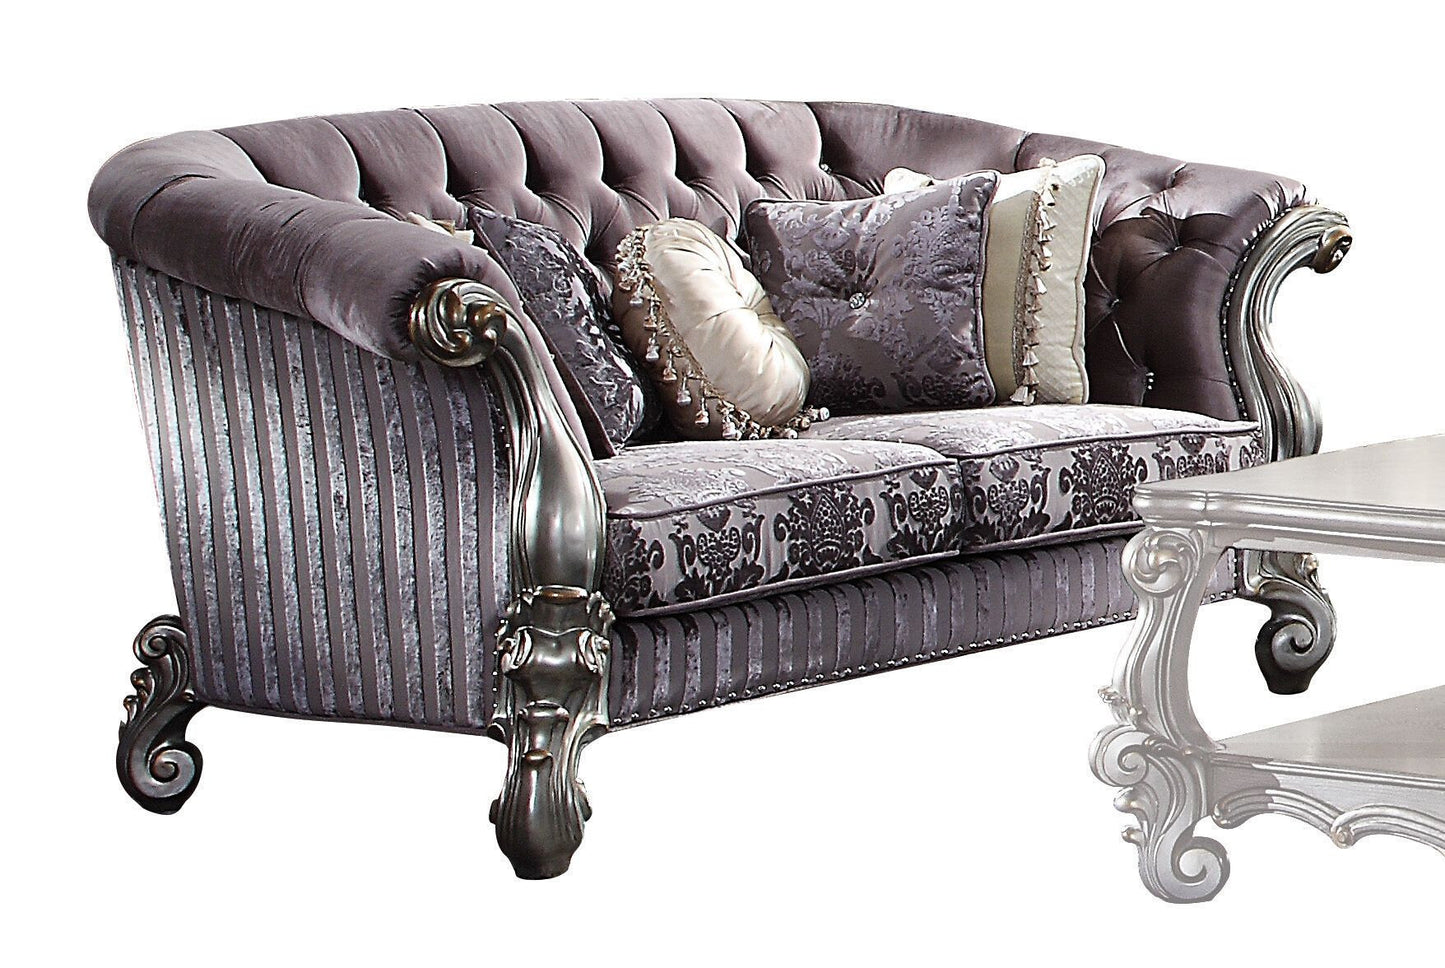 76" Purple And Platinum Velvet Love Seat And Toss Pillows By Homeroots